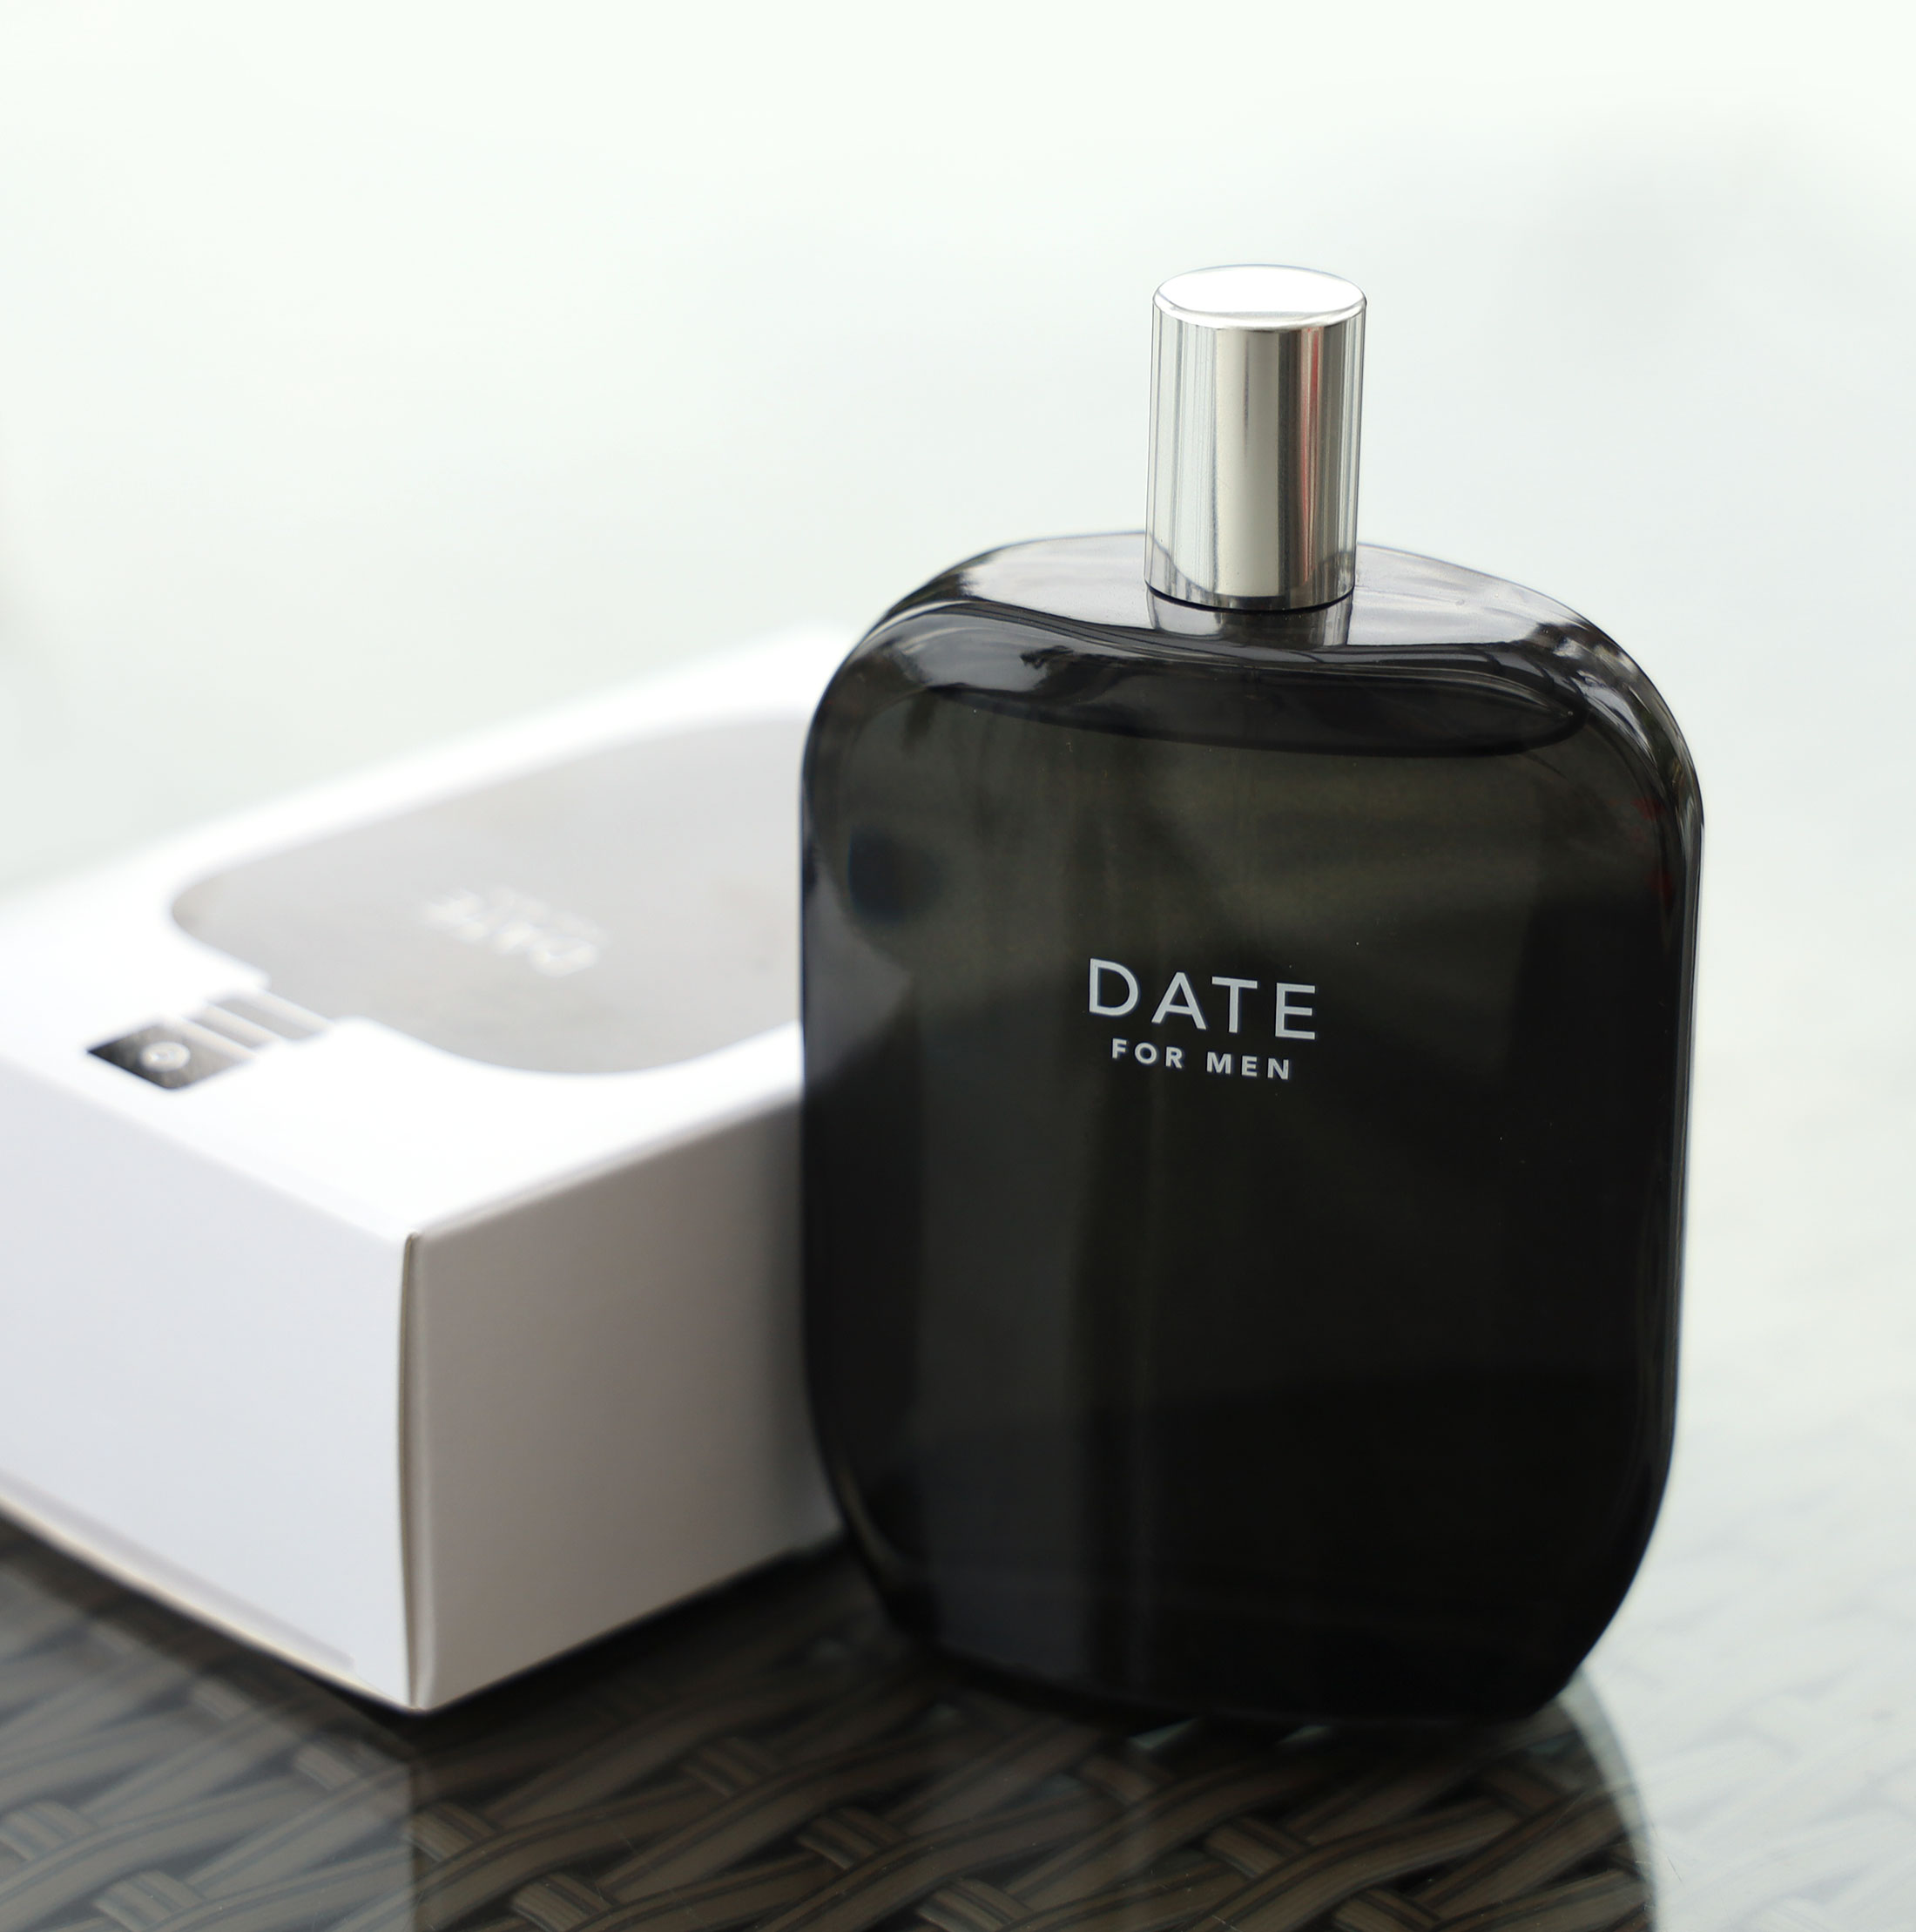 cologne smell dating)